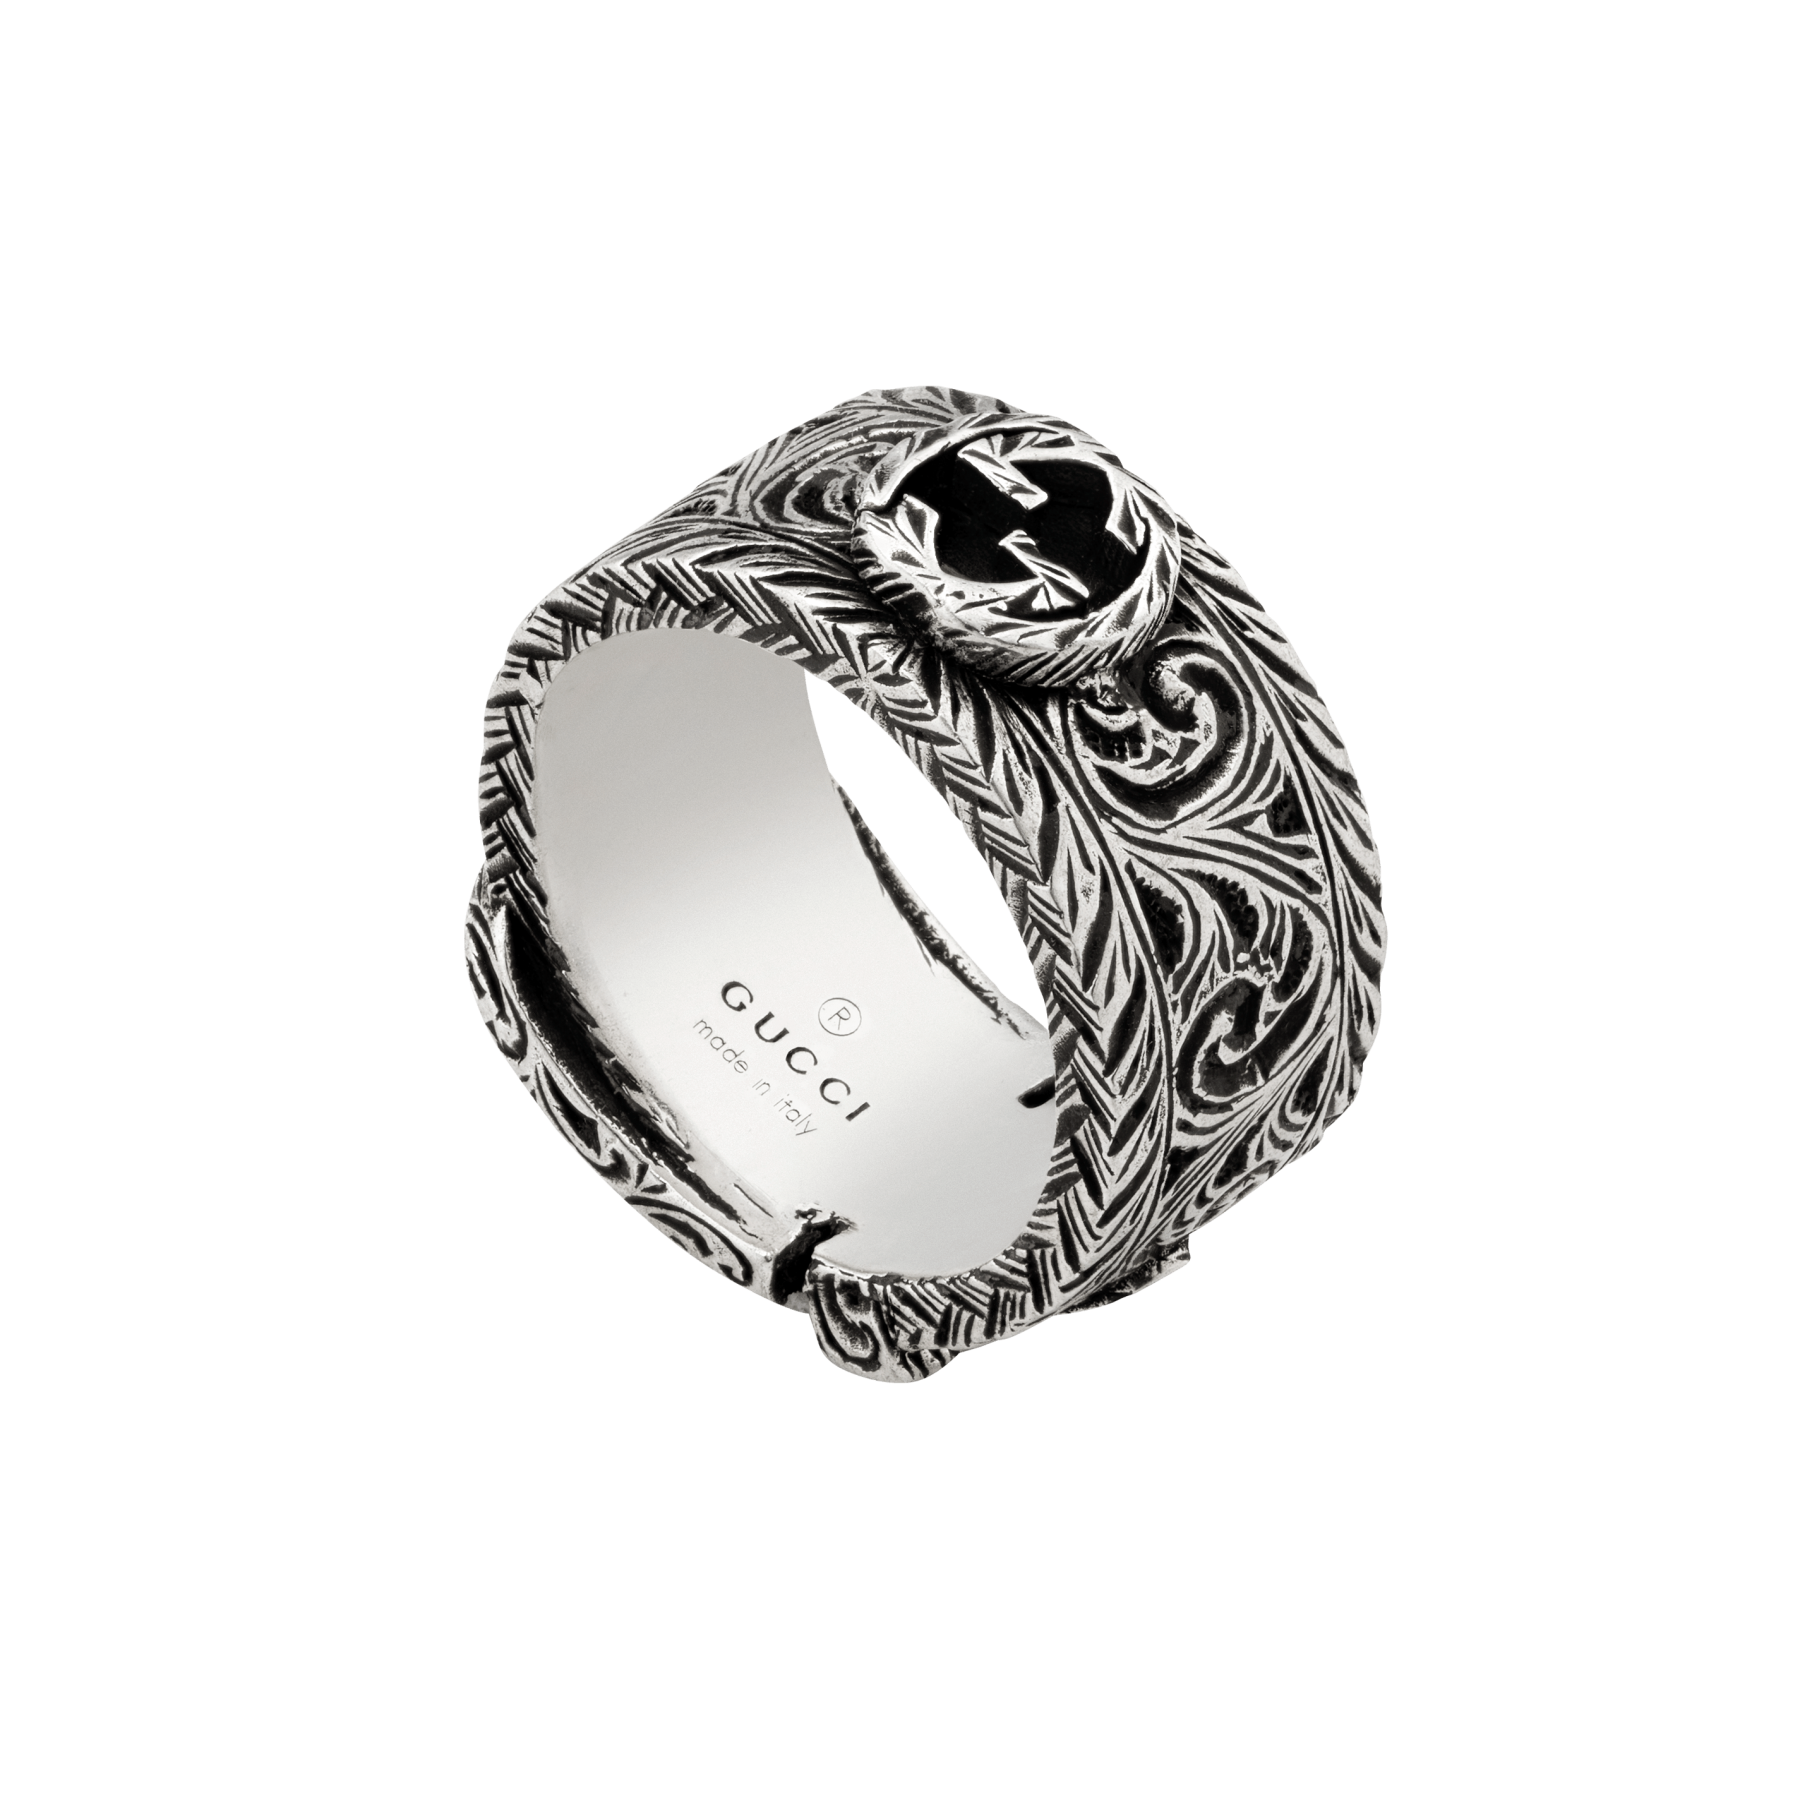 Gucci Garden Buckle Ring in Sterling Silver bottom view